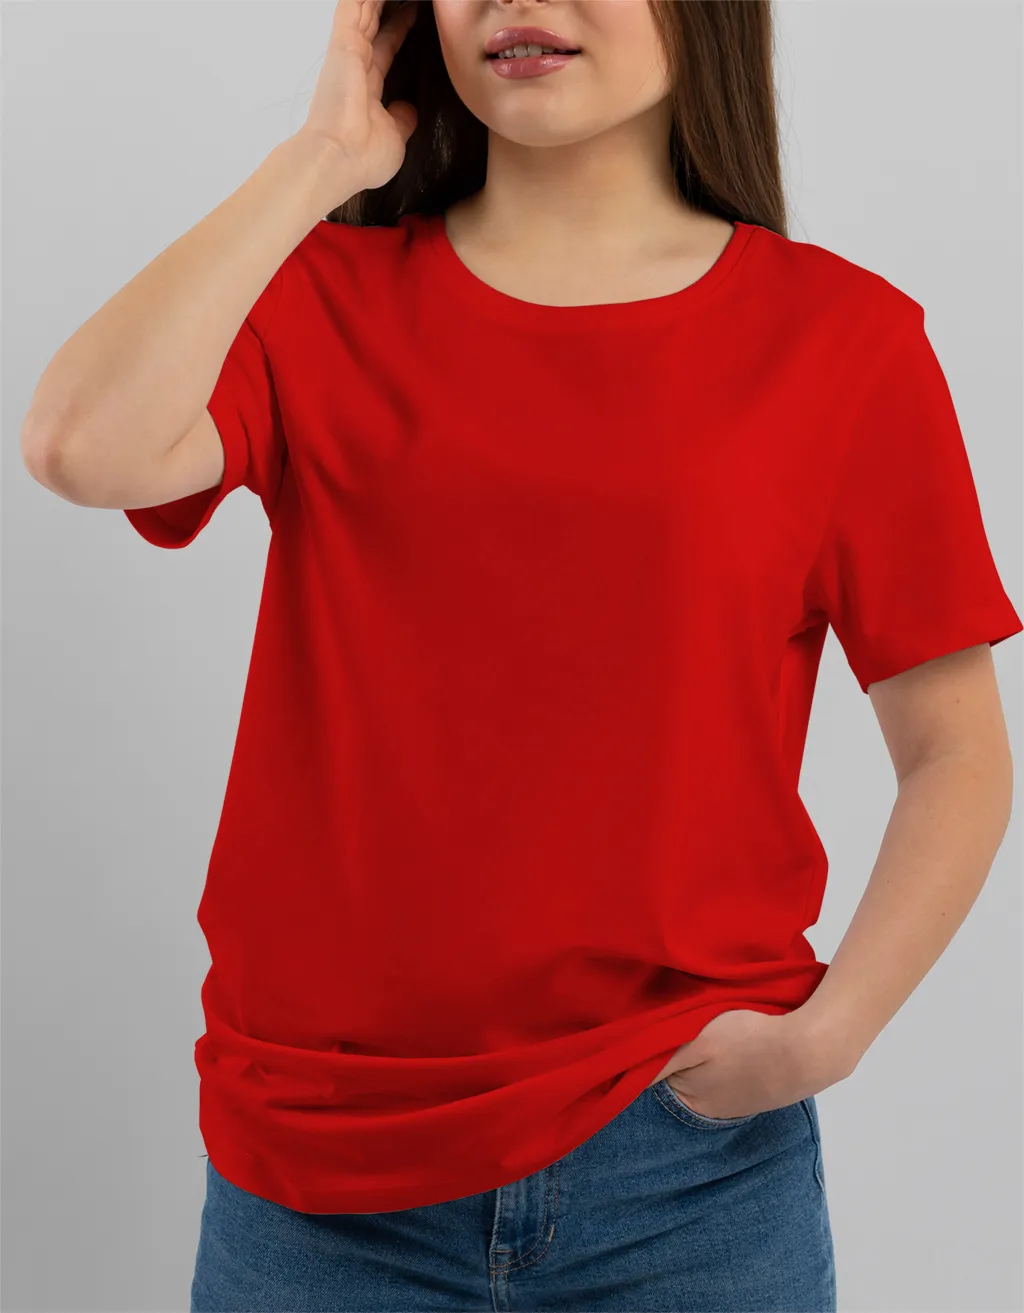 plain red t shirt for women online shopping in india